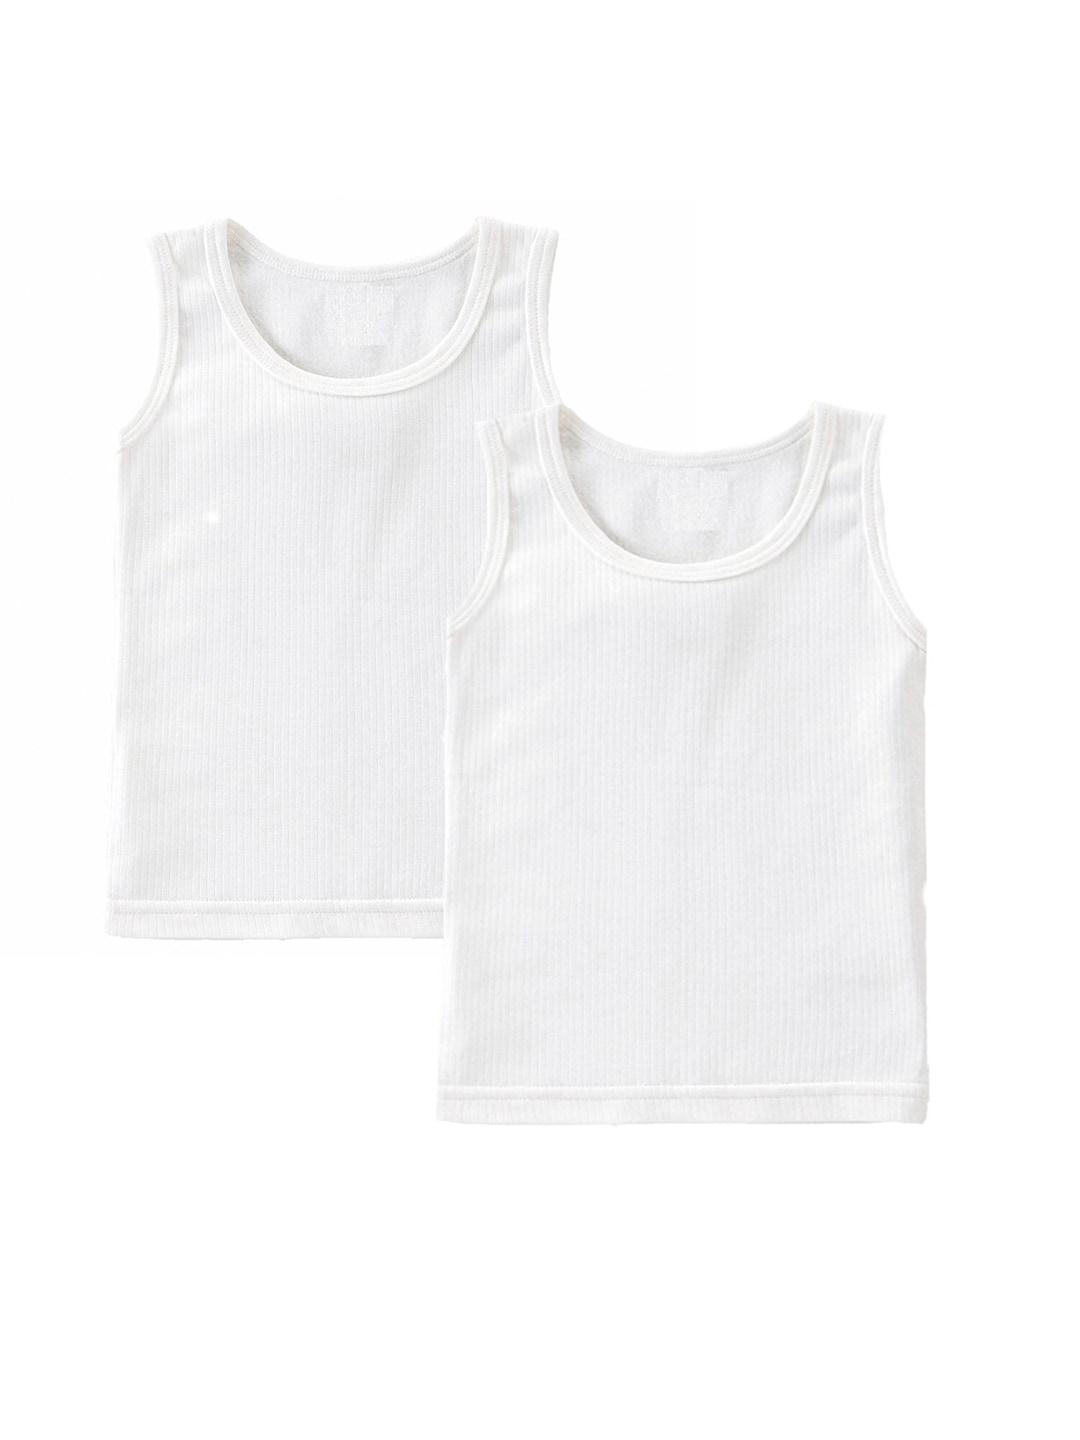 baesd-kids-pack-of-2-cotton-thermal-tops